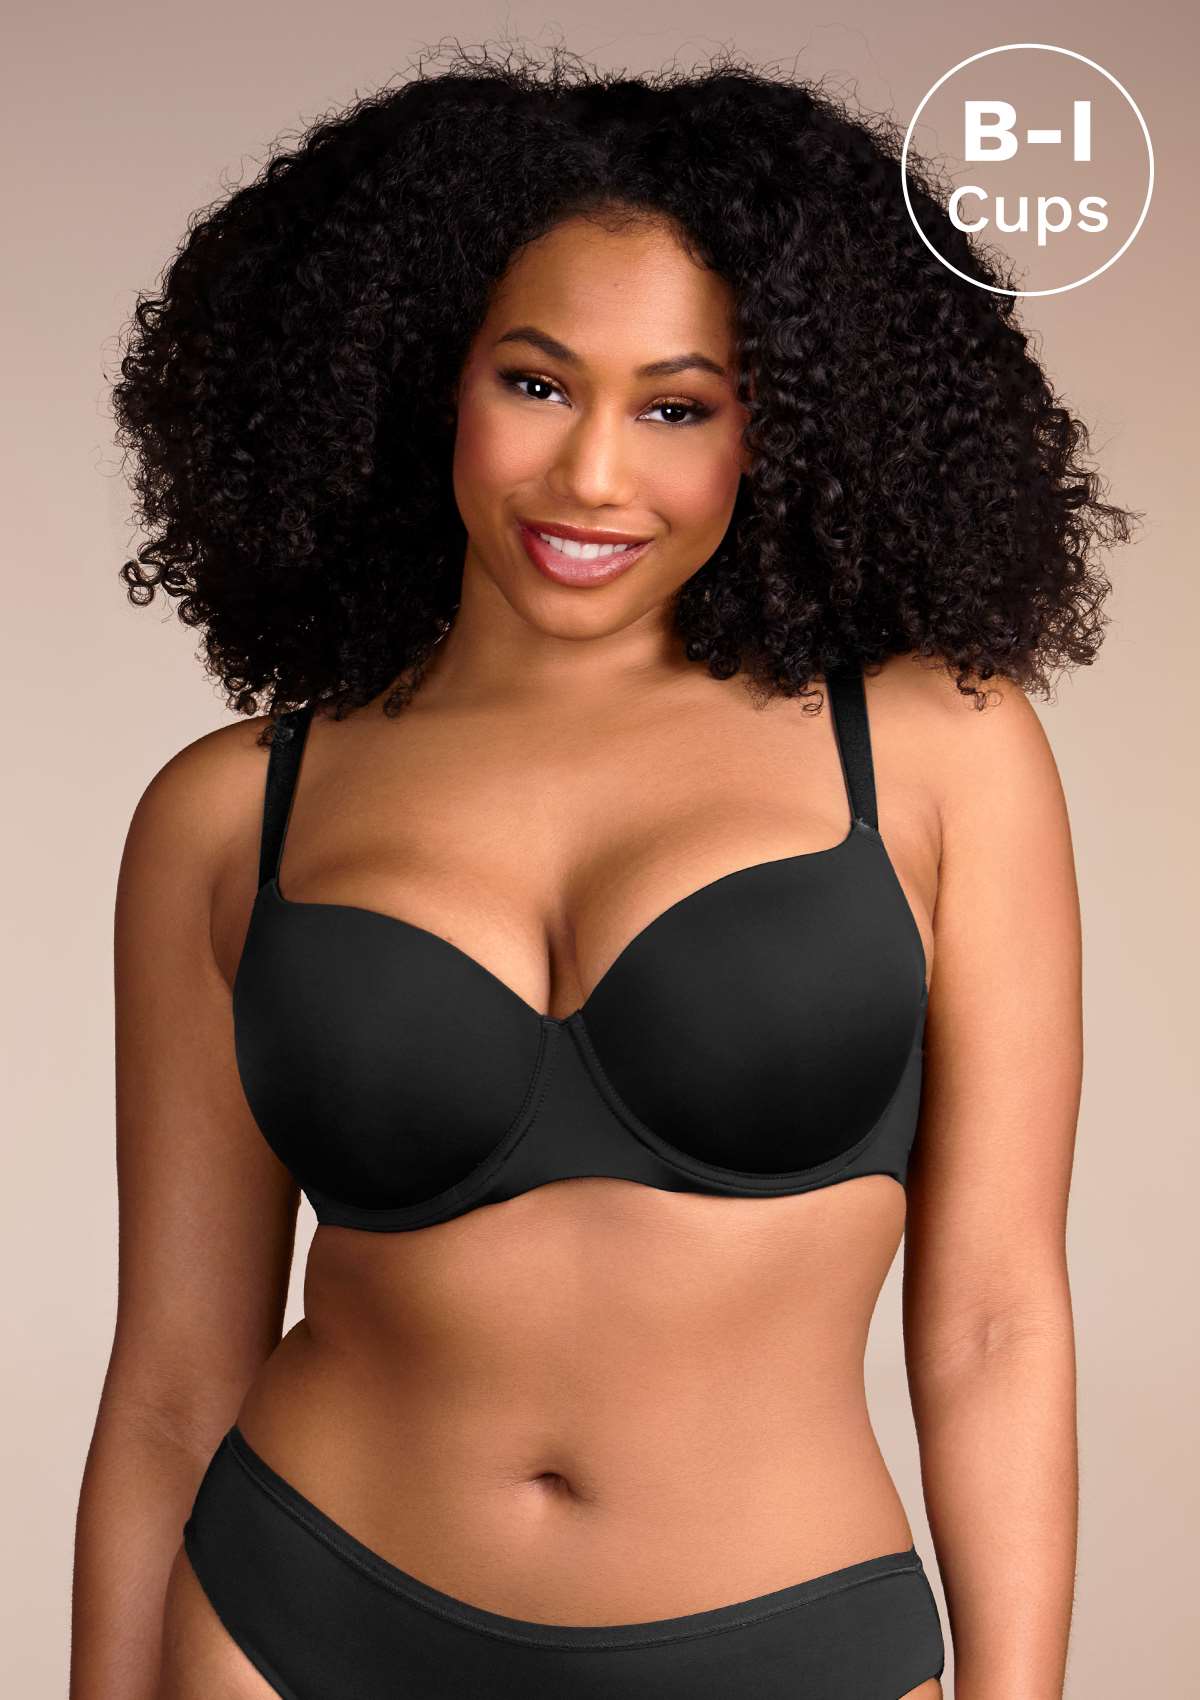 HSIA Gemma Smooth Padded T-shirt Everyday Bras - For Lift And Comfort - Black / 42 / DD/E